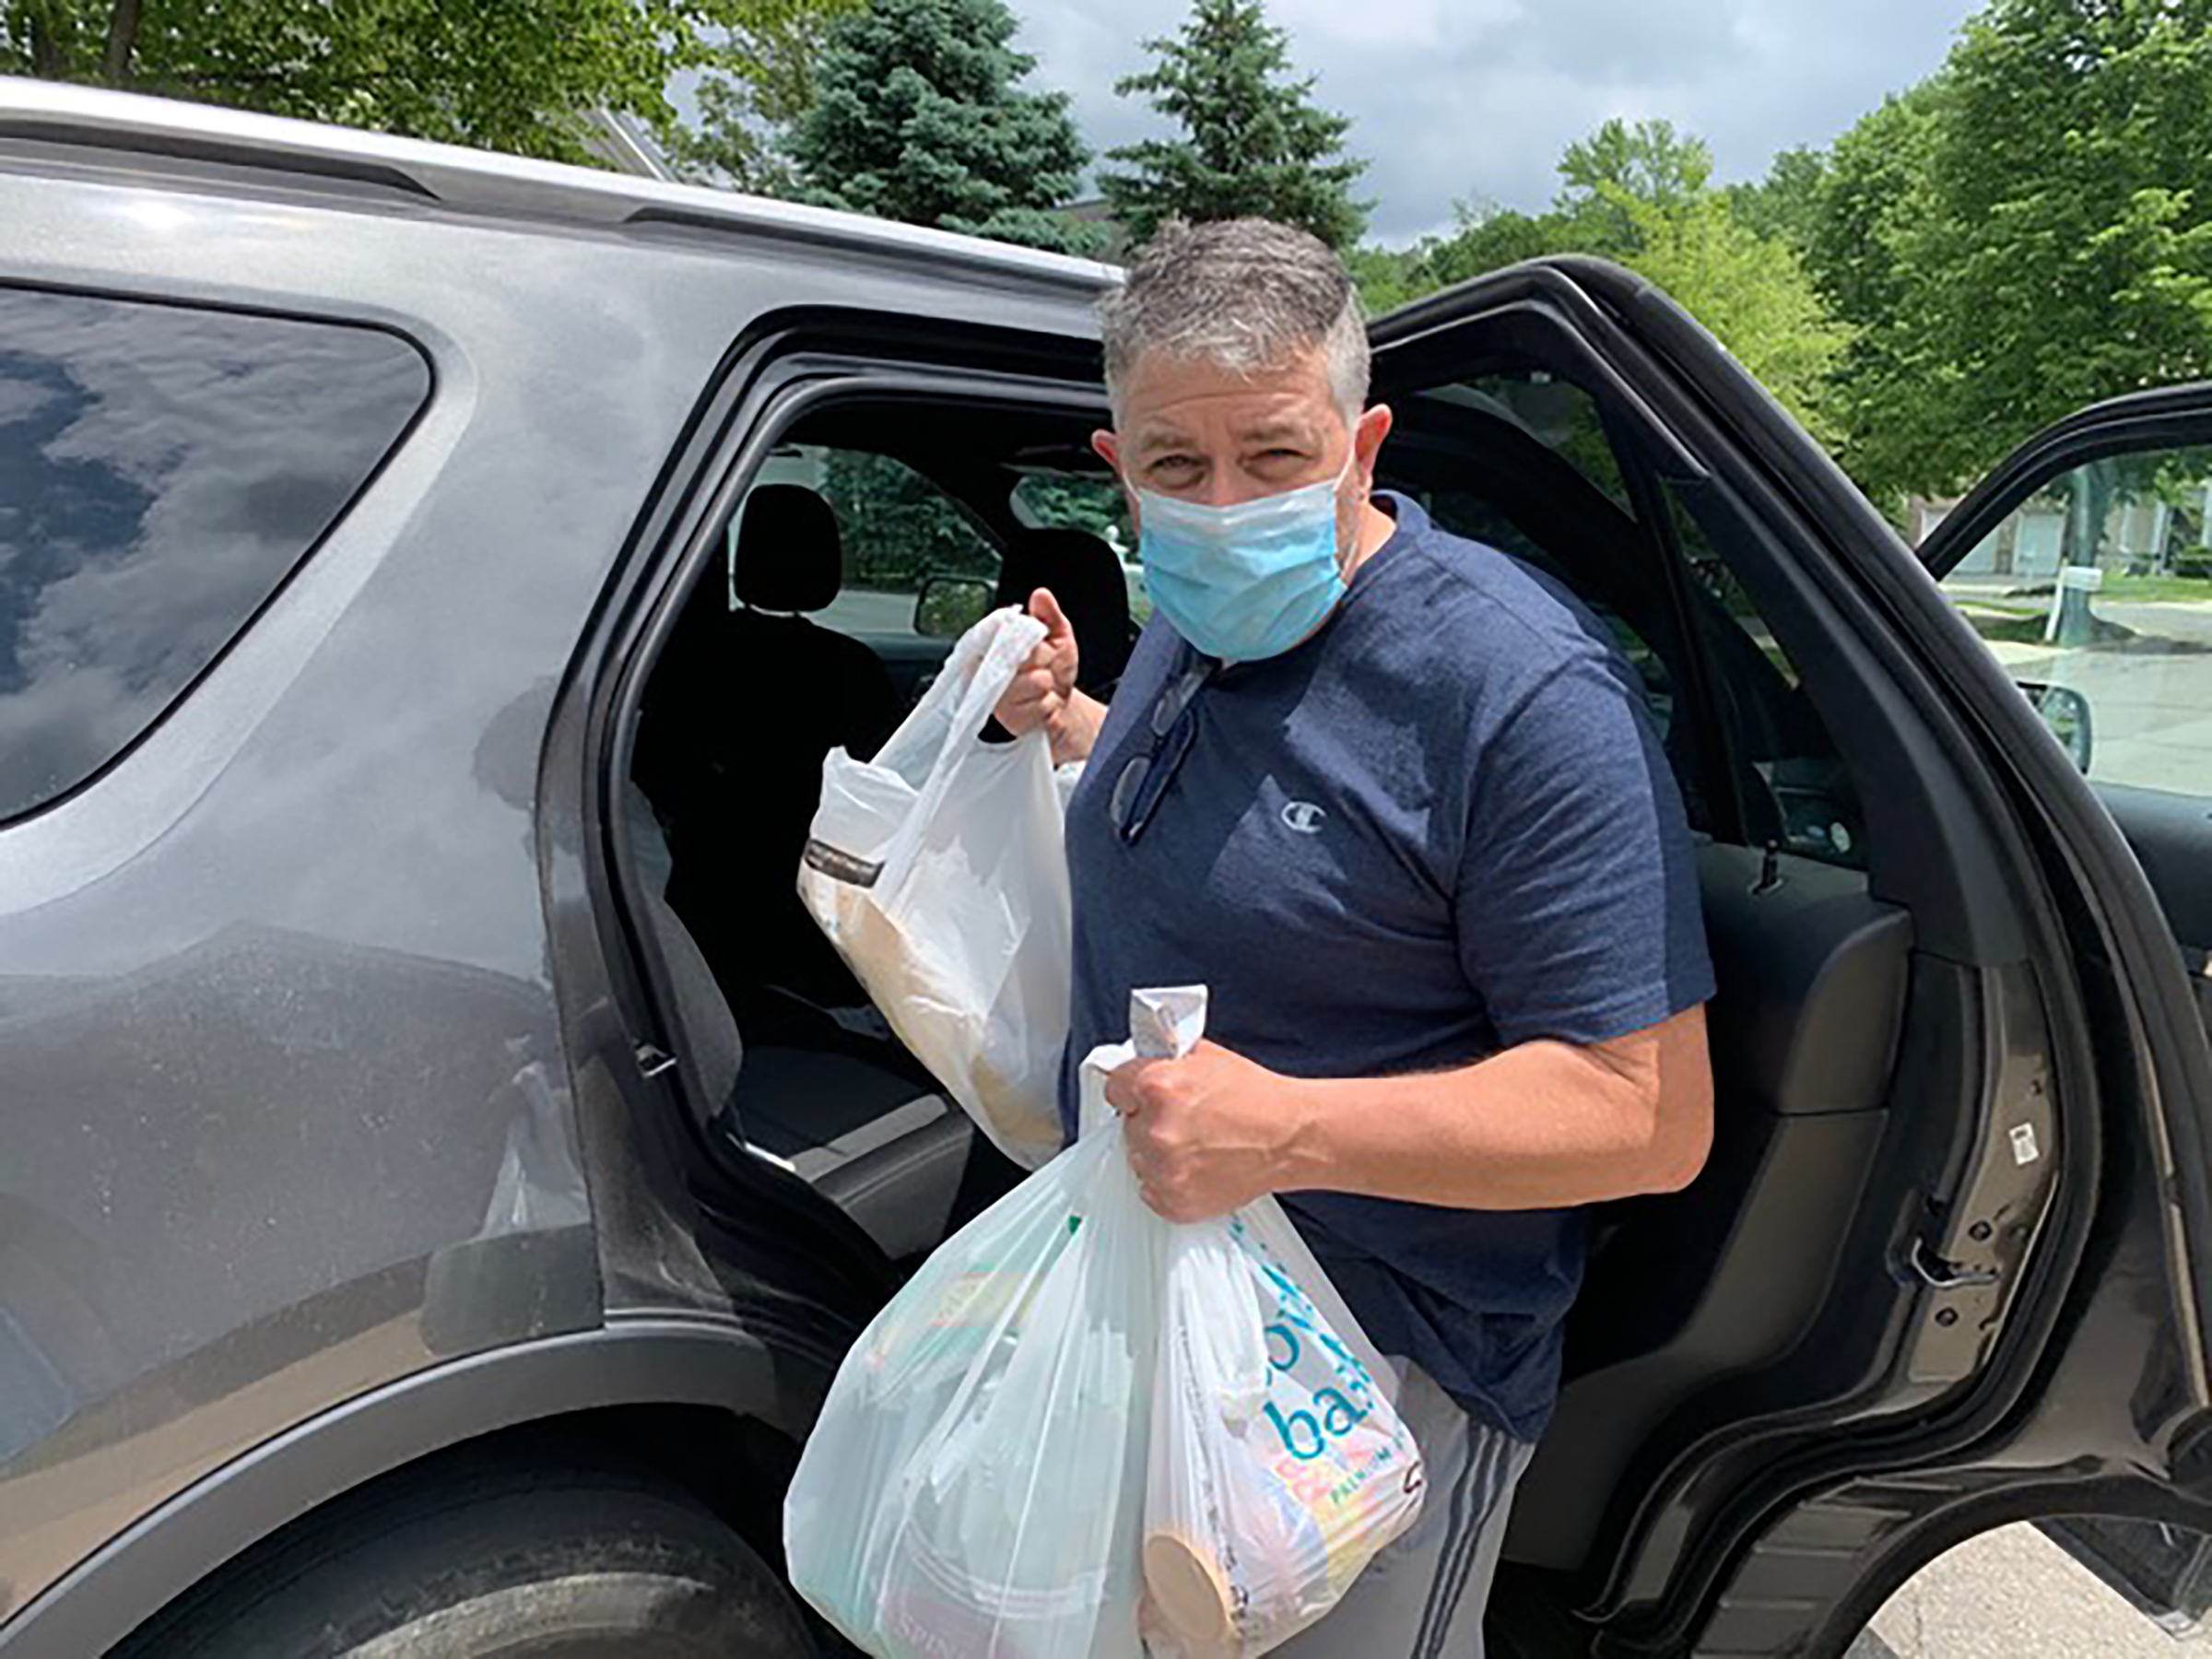 Newspaper deliveryman Greg Dailey unloading the car on May 29. Dailey began a grocery drop-off service in mid-March to anyone in need along his paper route, which has since supplied more than 140 homes in Mercer County, N.J. (Courtesy Greg Dailey)